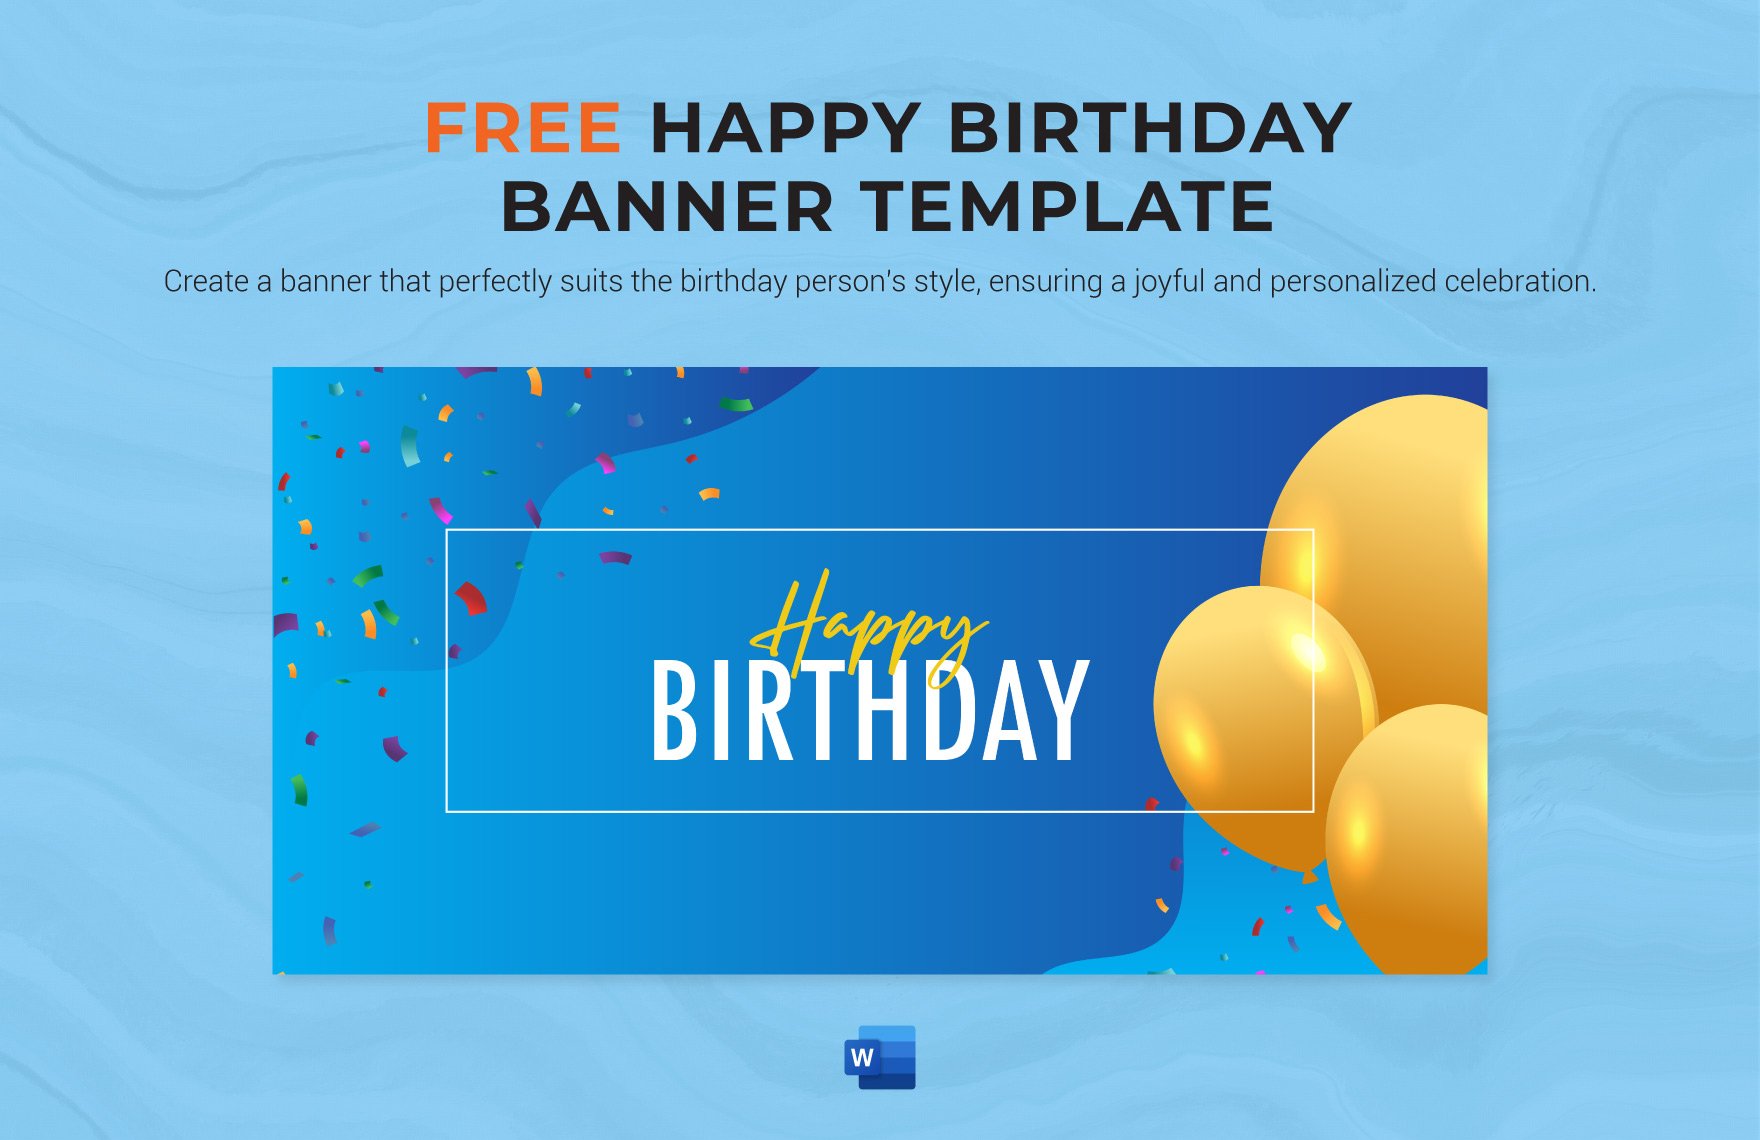 Free Happy Birthday Banner Template in Word